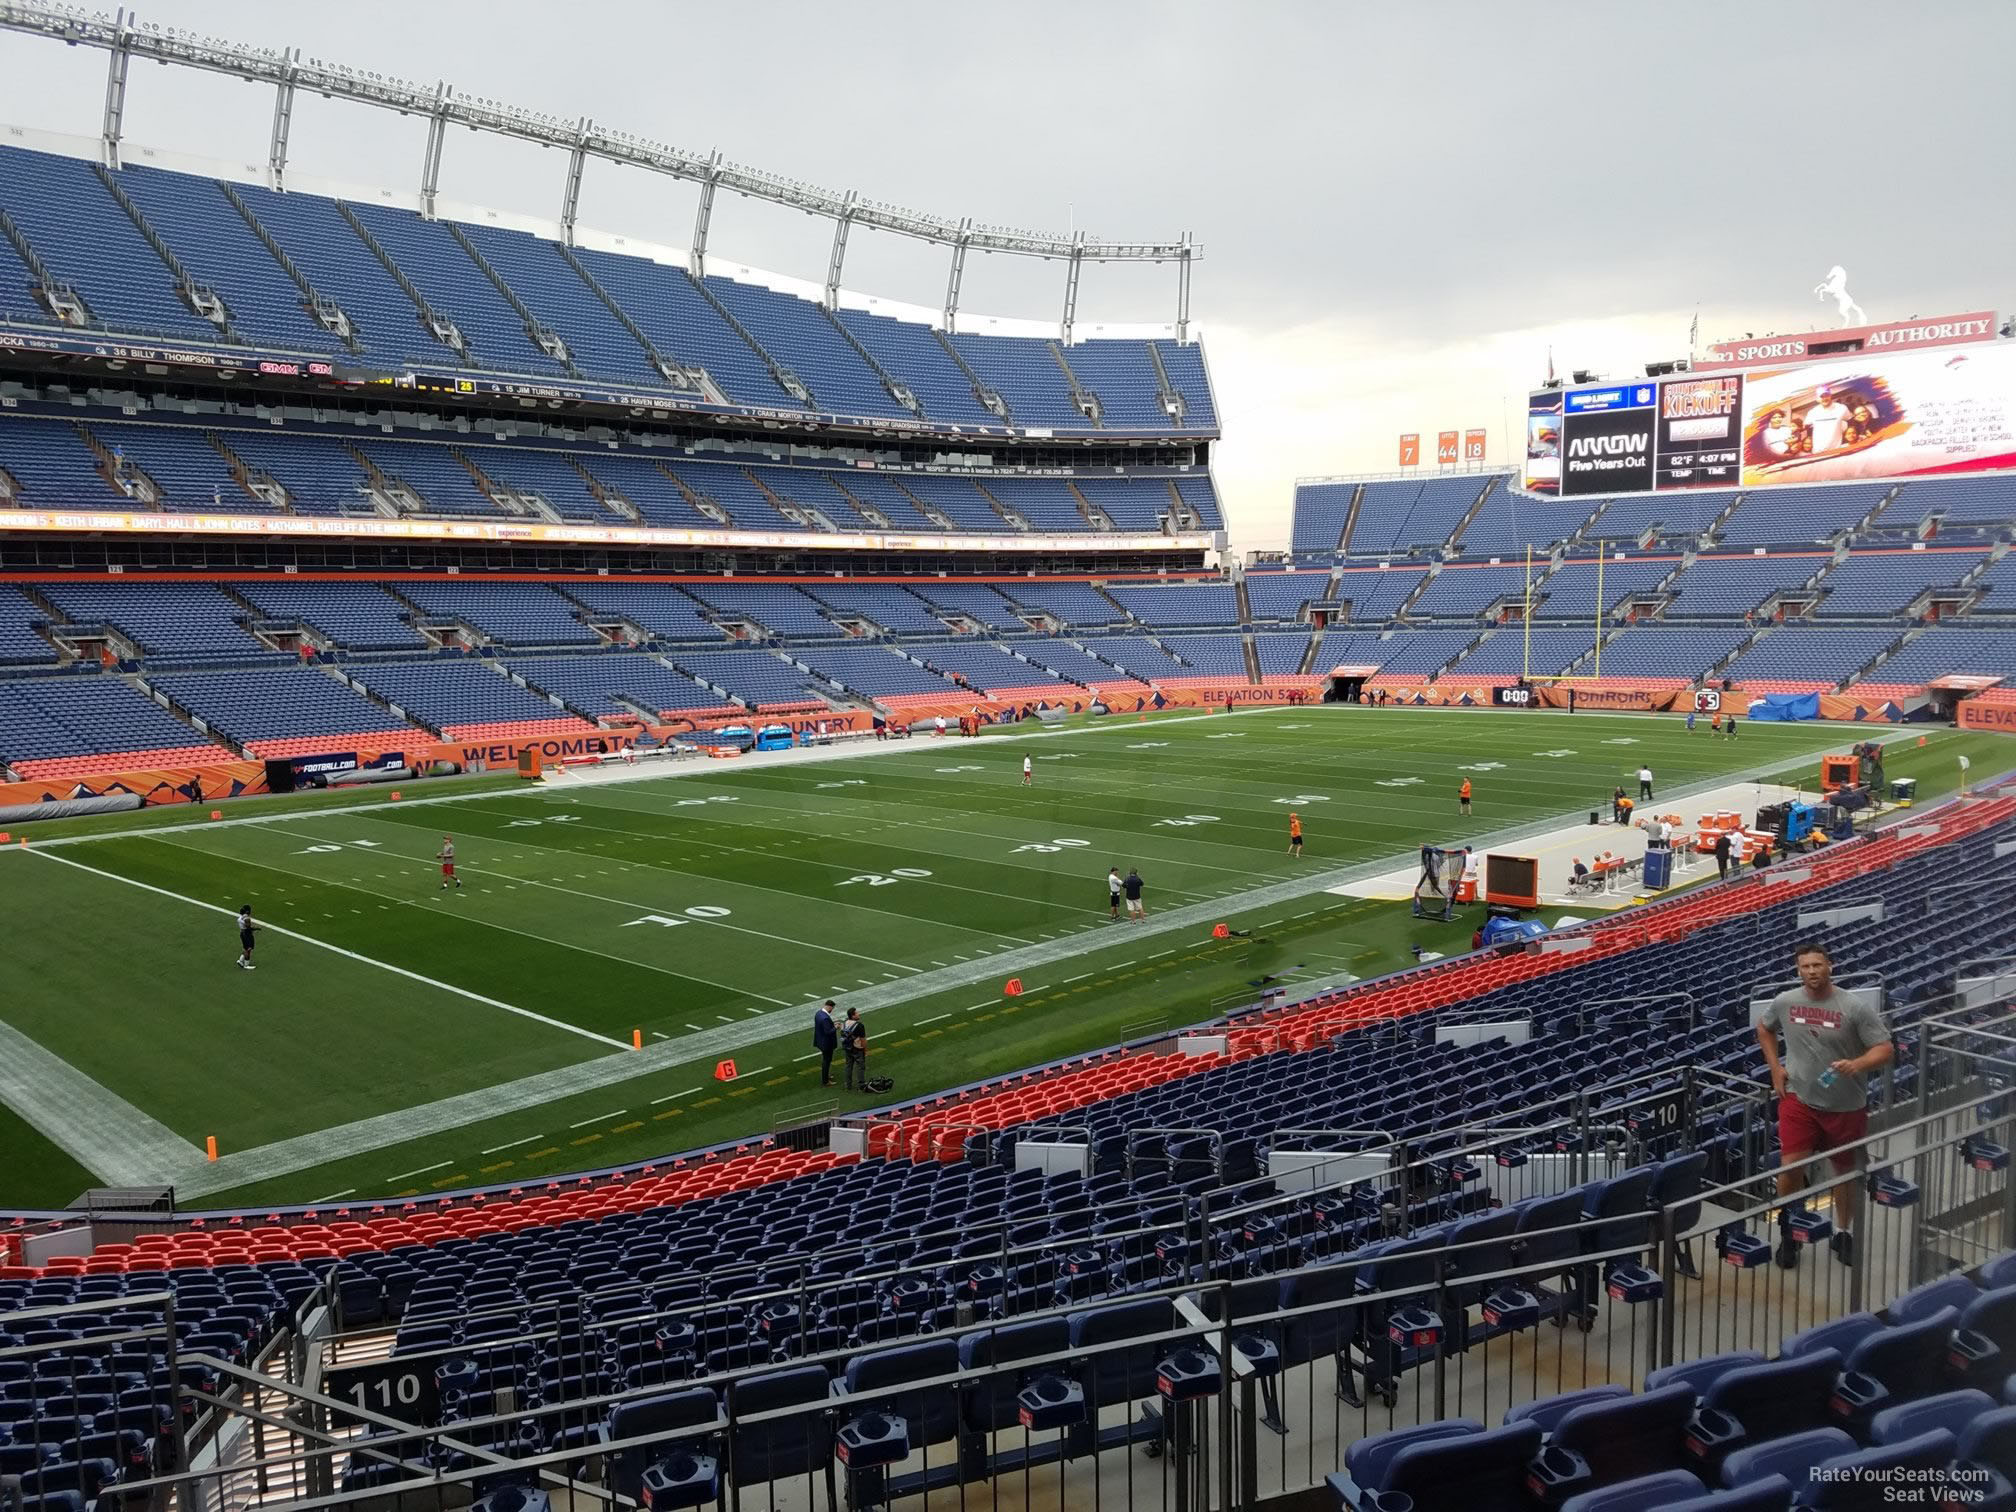 section 110, row 30 seat view  - empower field (at mile high)